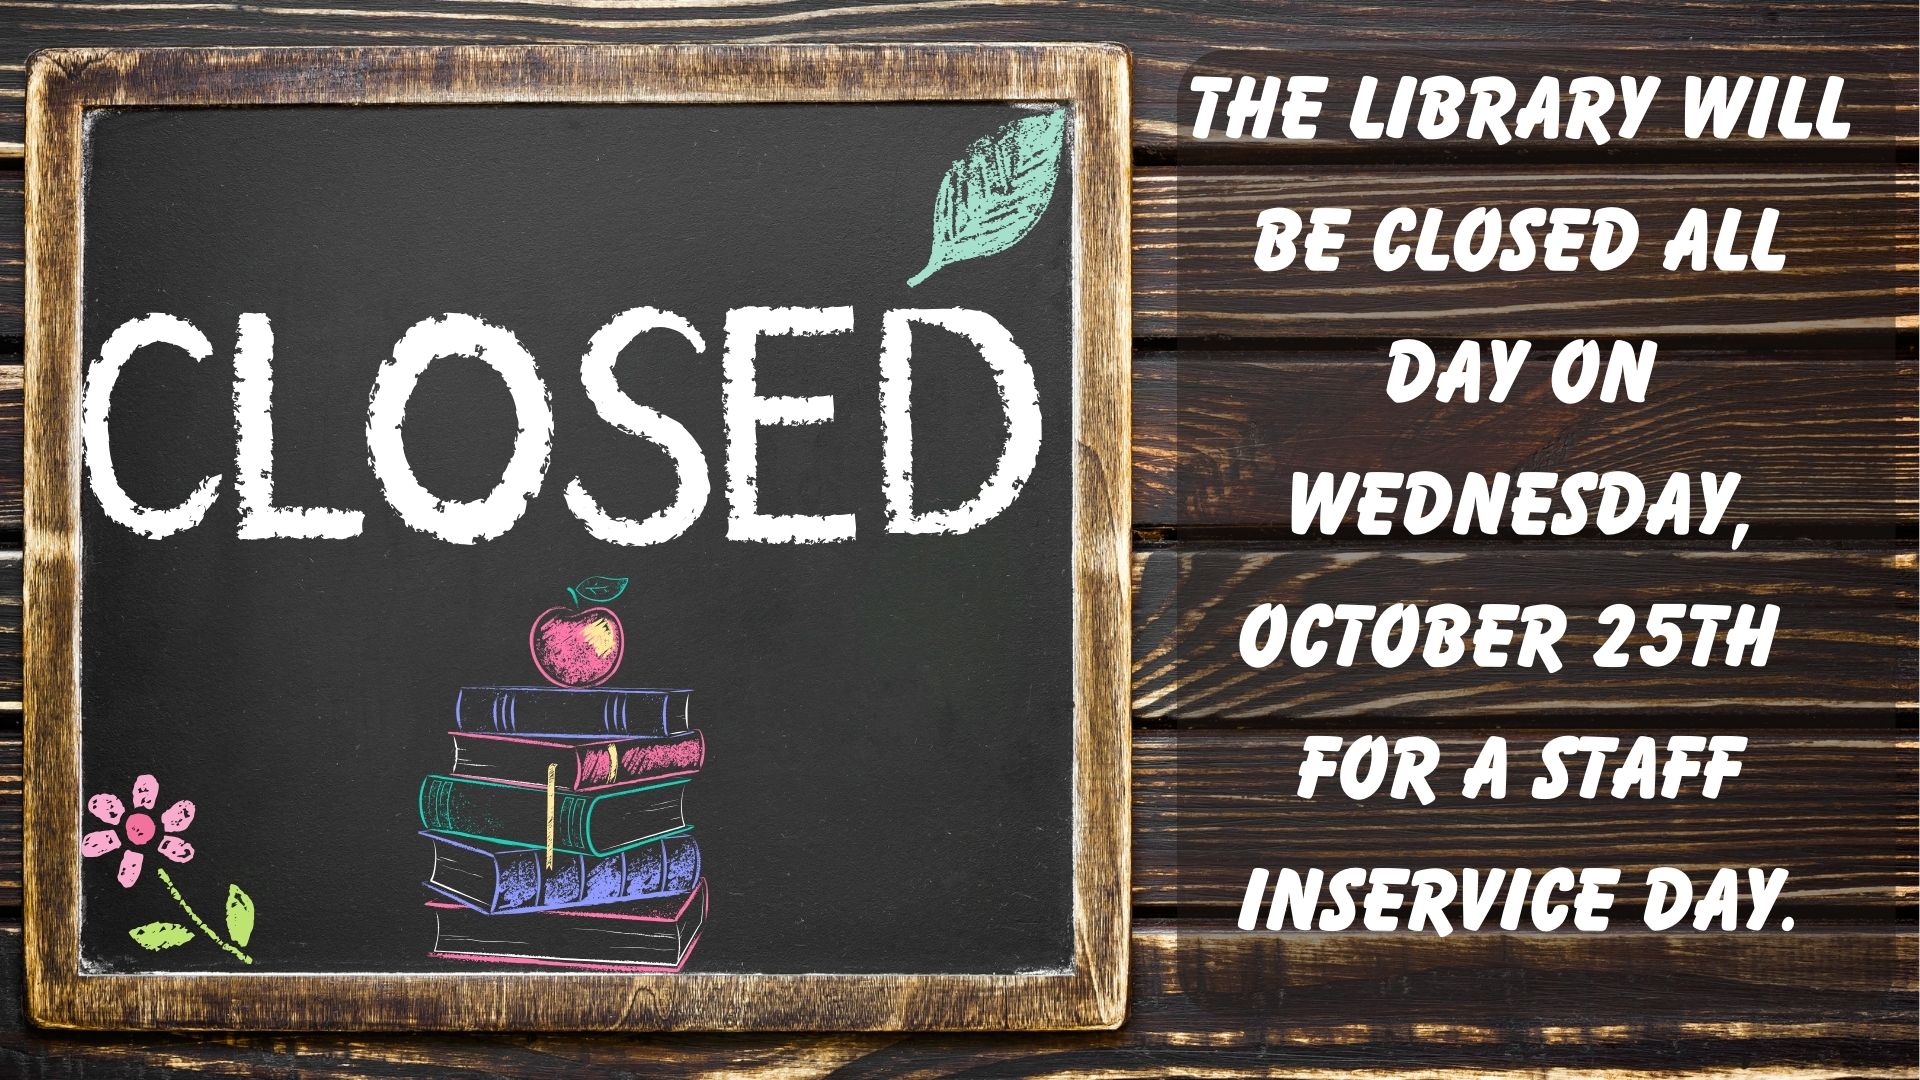 Closed for Staff Inservice Day